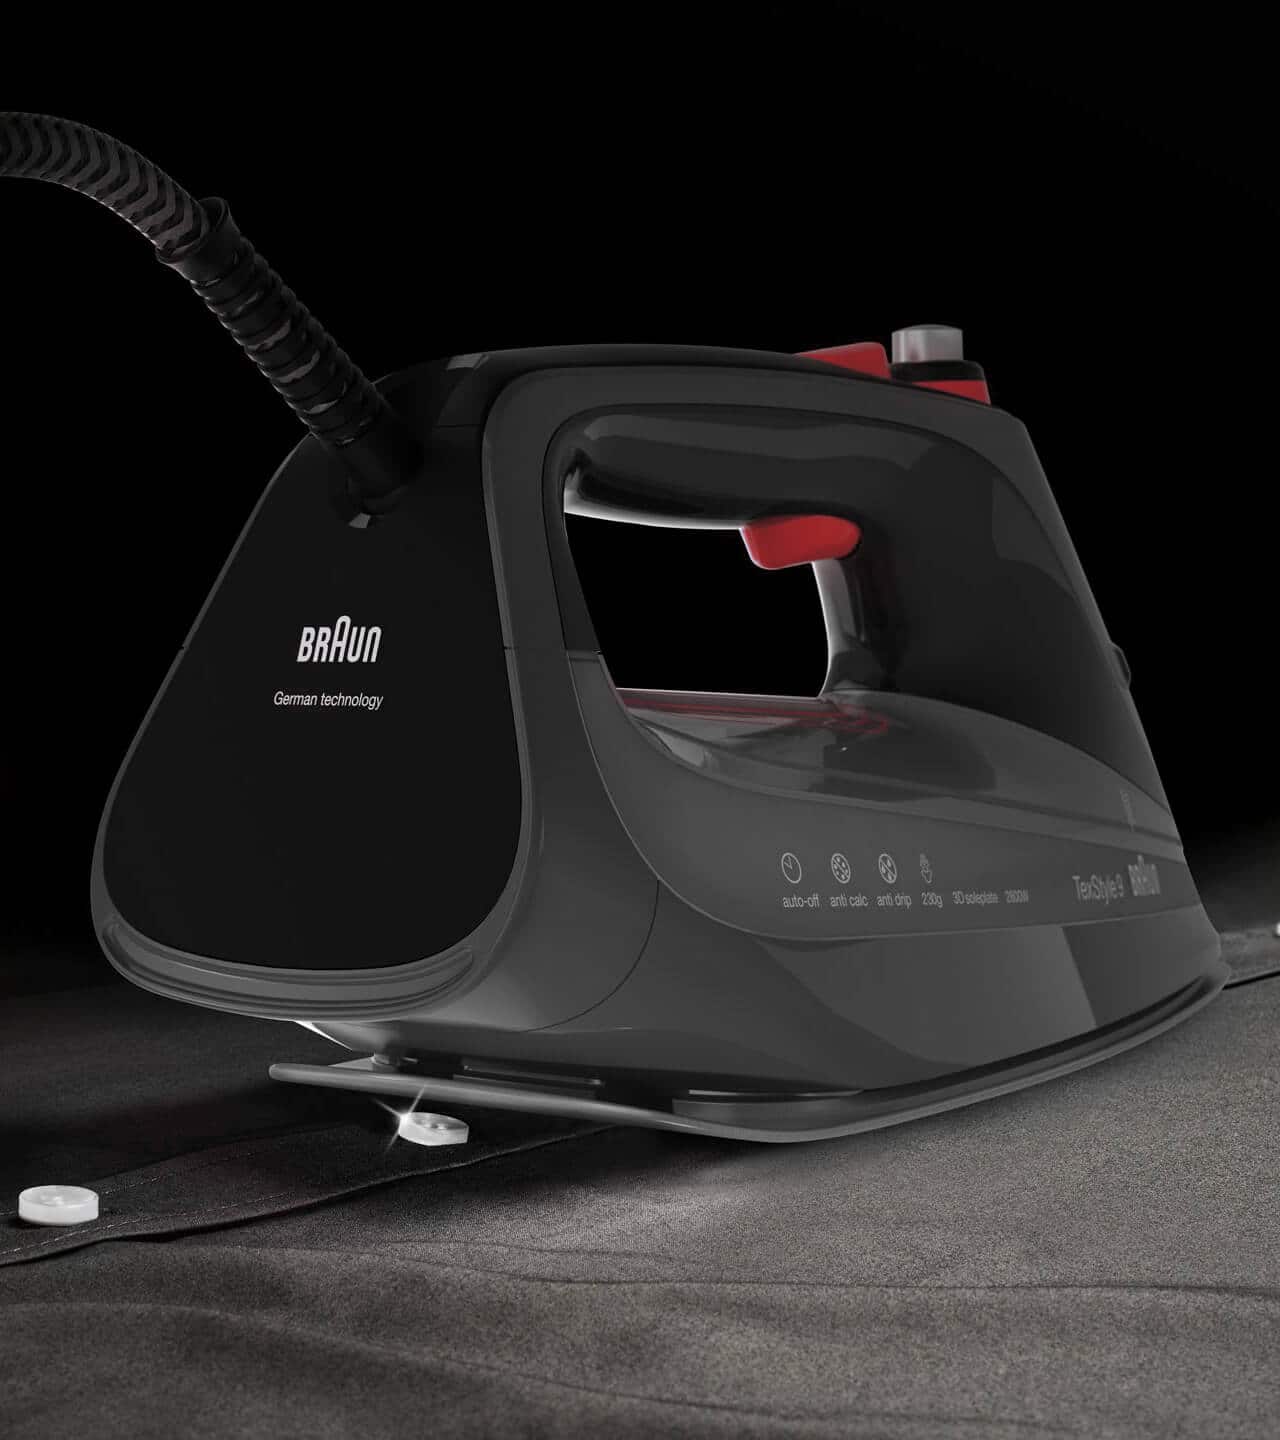 Braun TexStyle 9 steam iron – Ultimate power for great performance